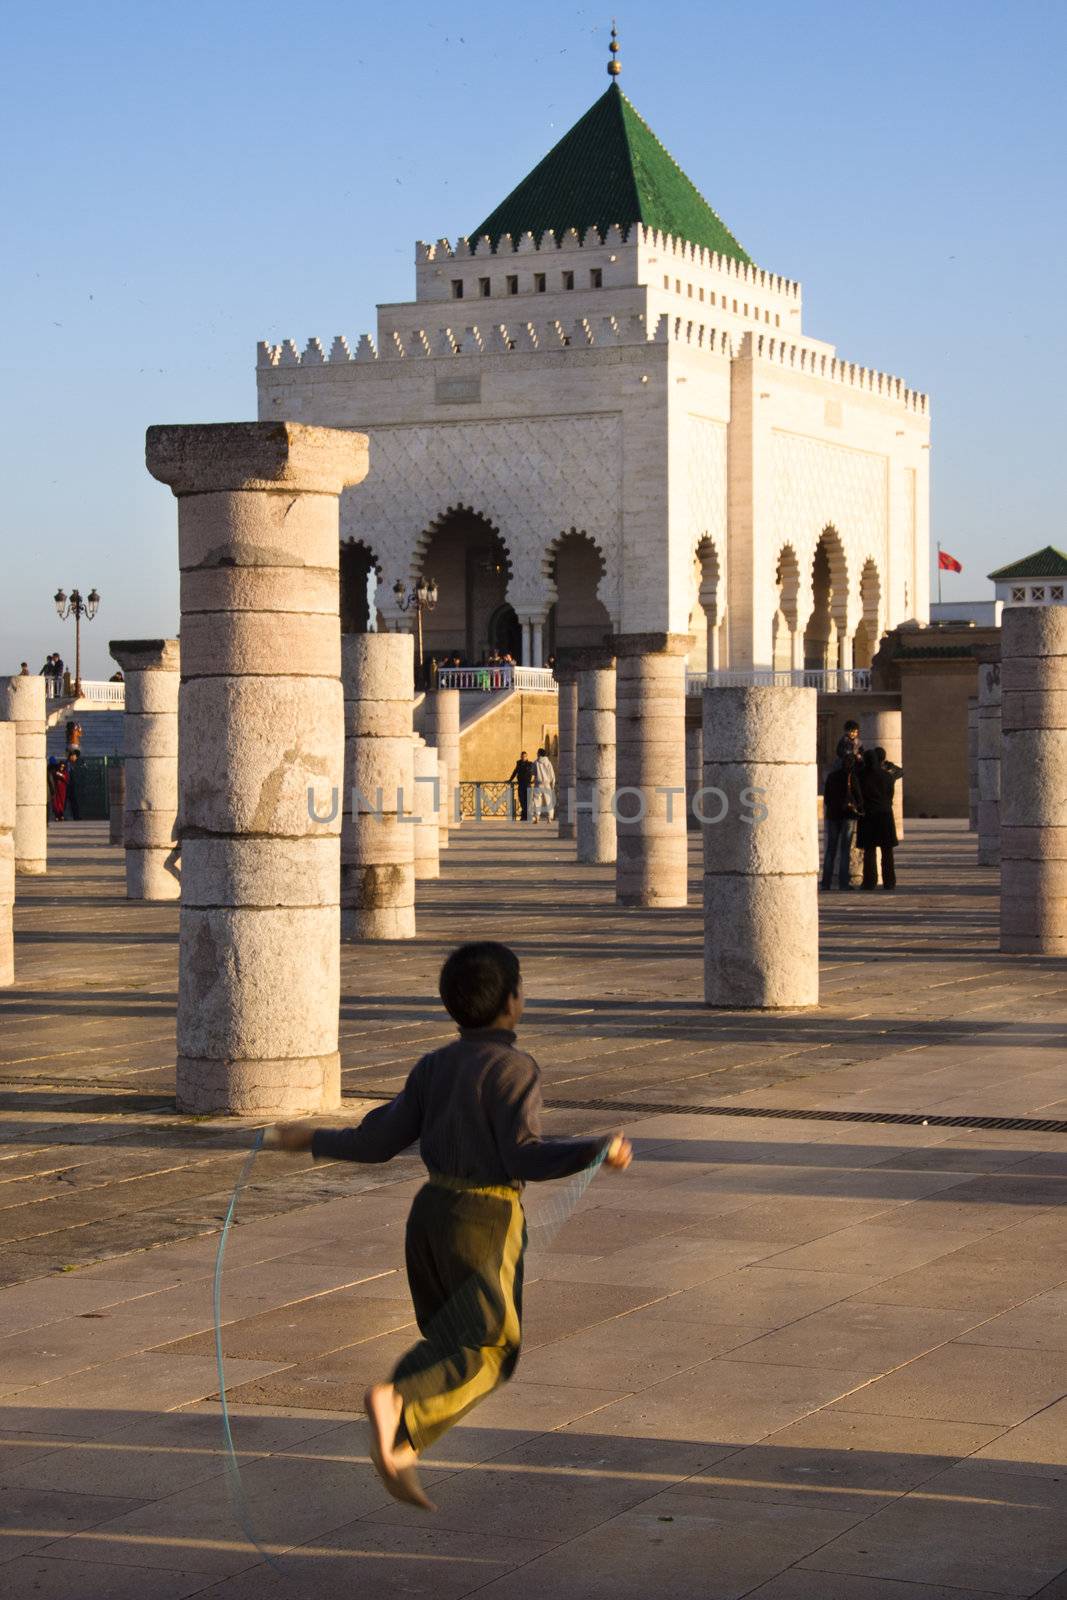 Child playing in front of Mausoleum of Mohammed V